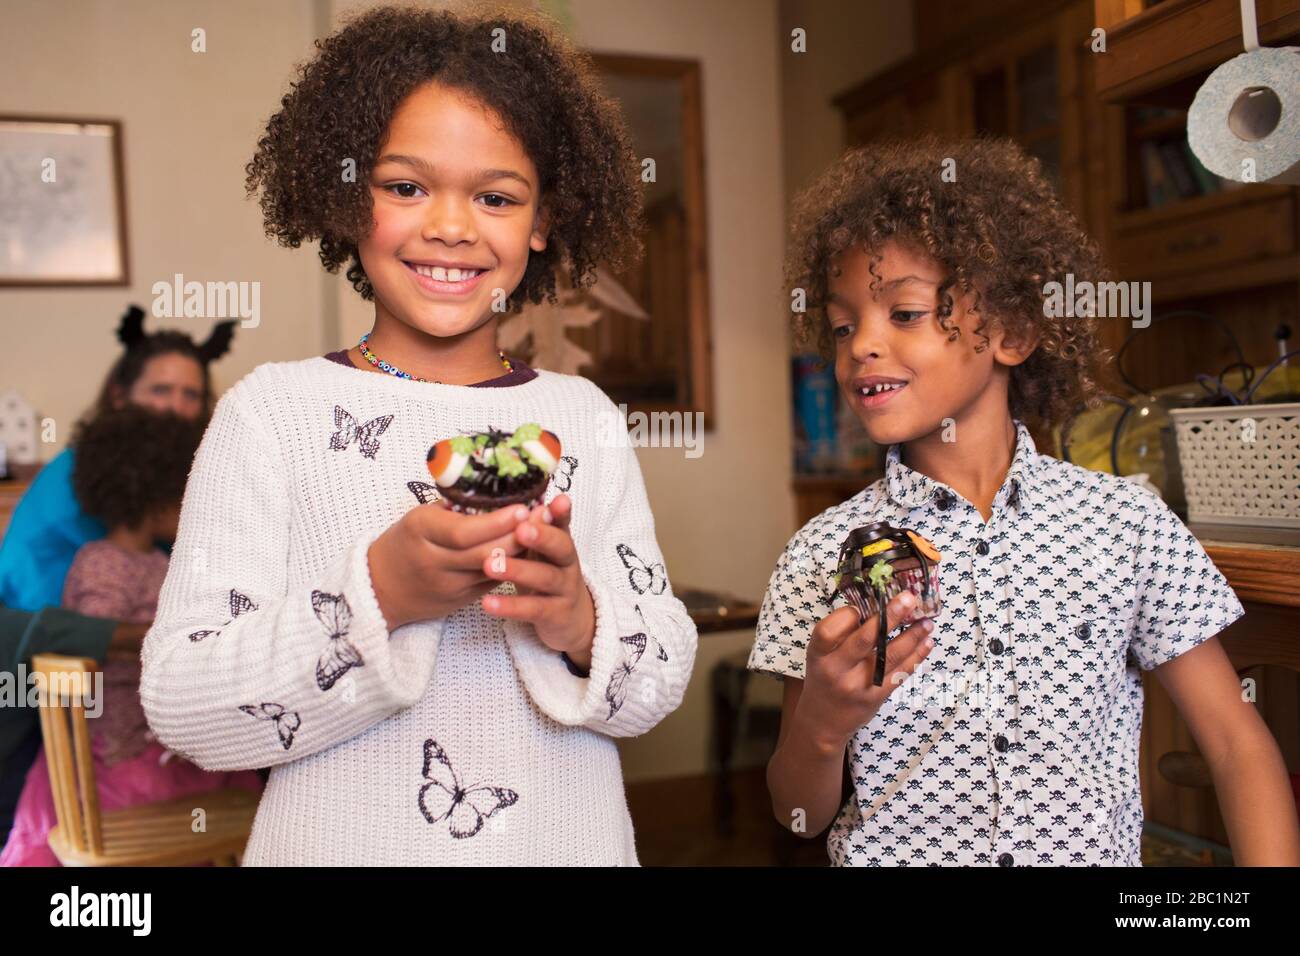 Portrait happy brother and sister with decorated Halloween cupcakes Stock Photo